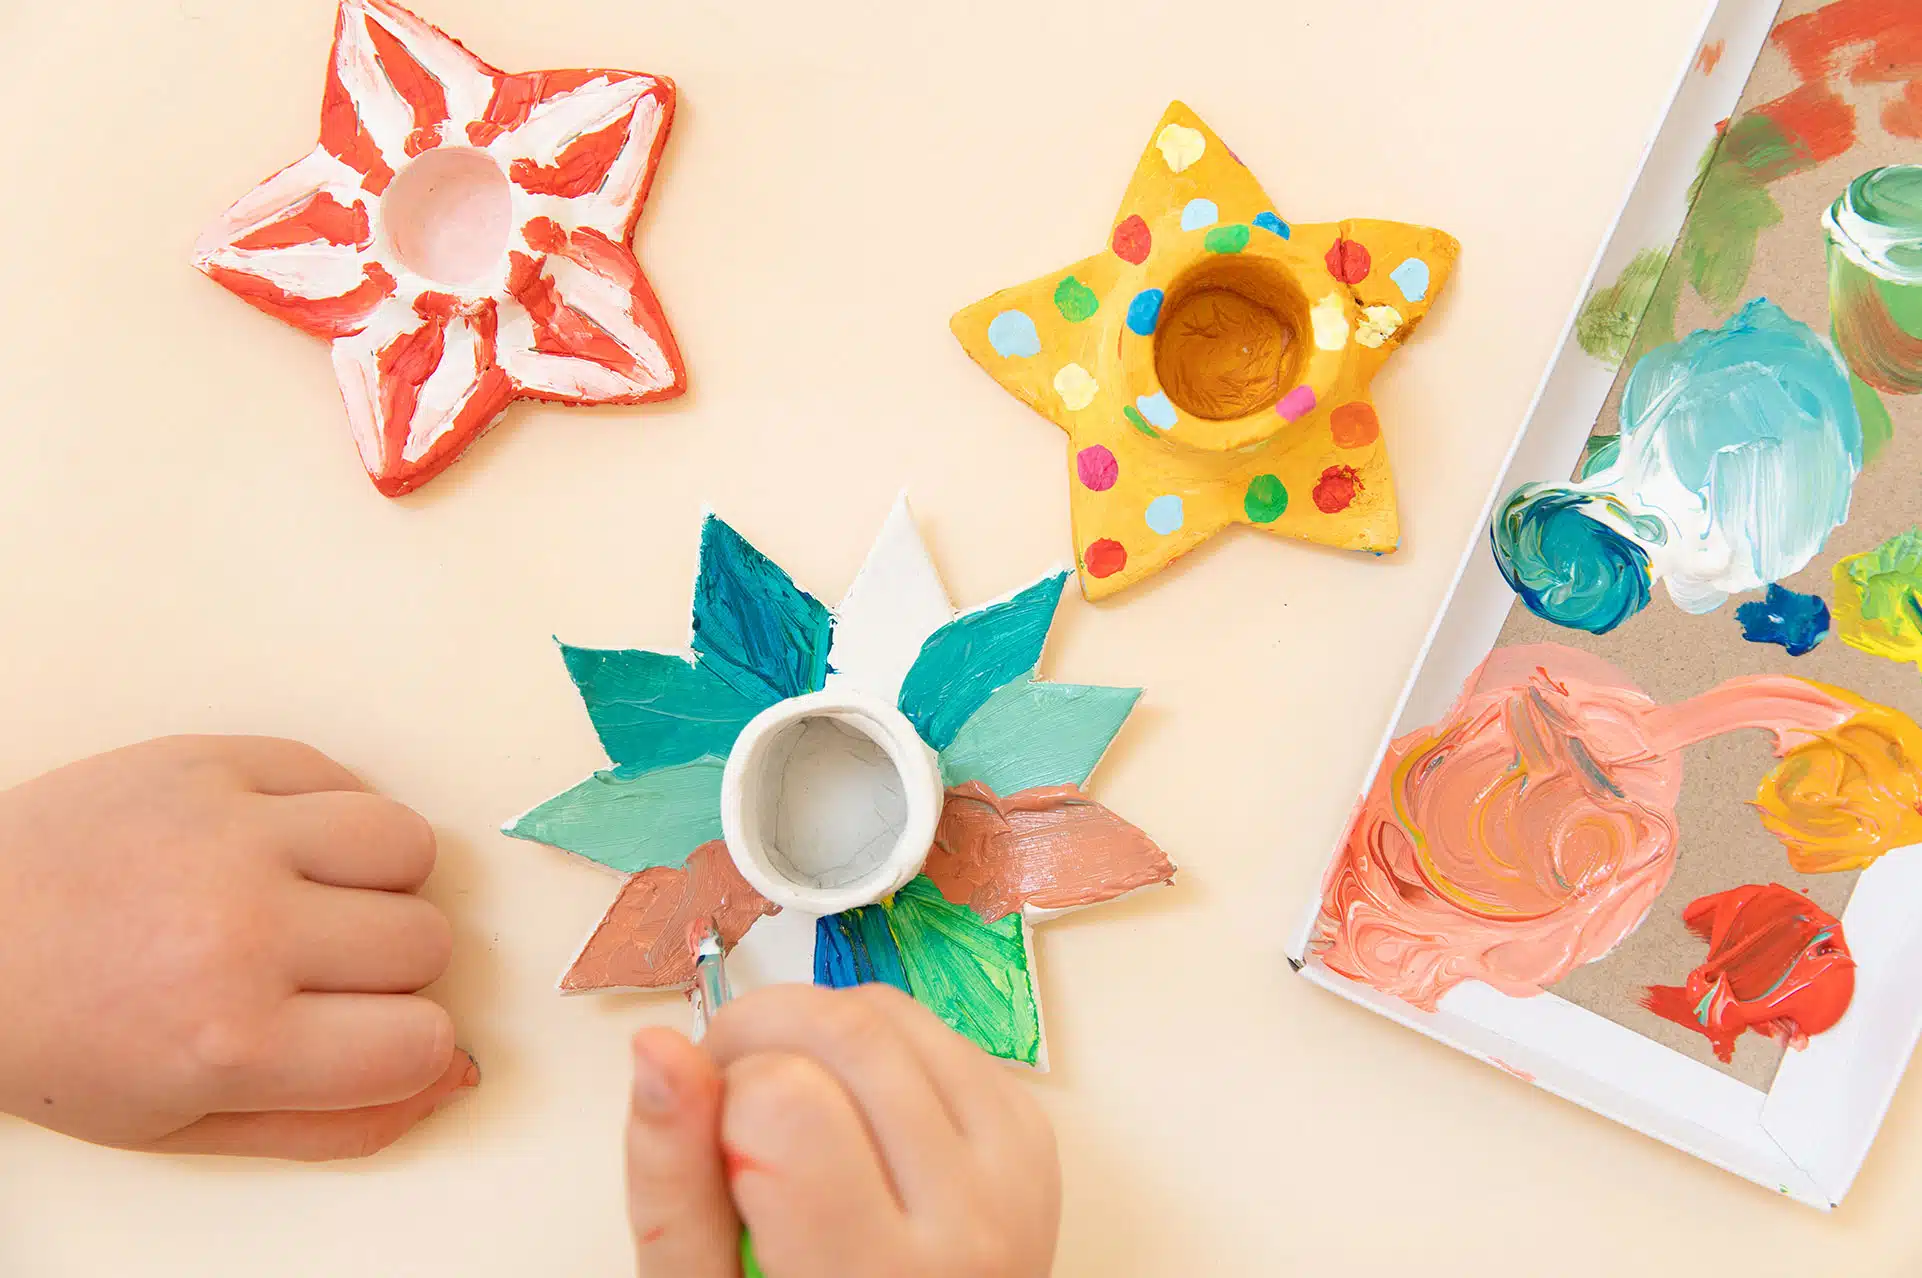 LoLA Glorious Gifts Art Projects for Children